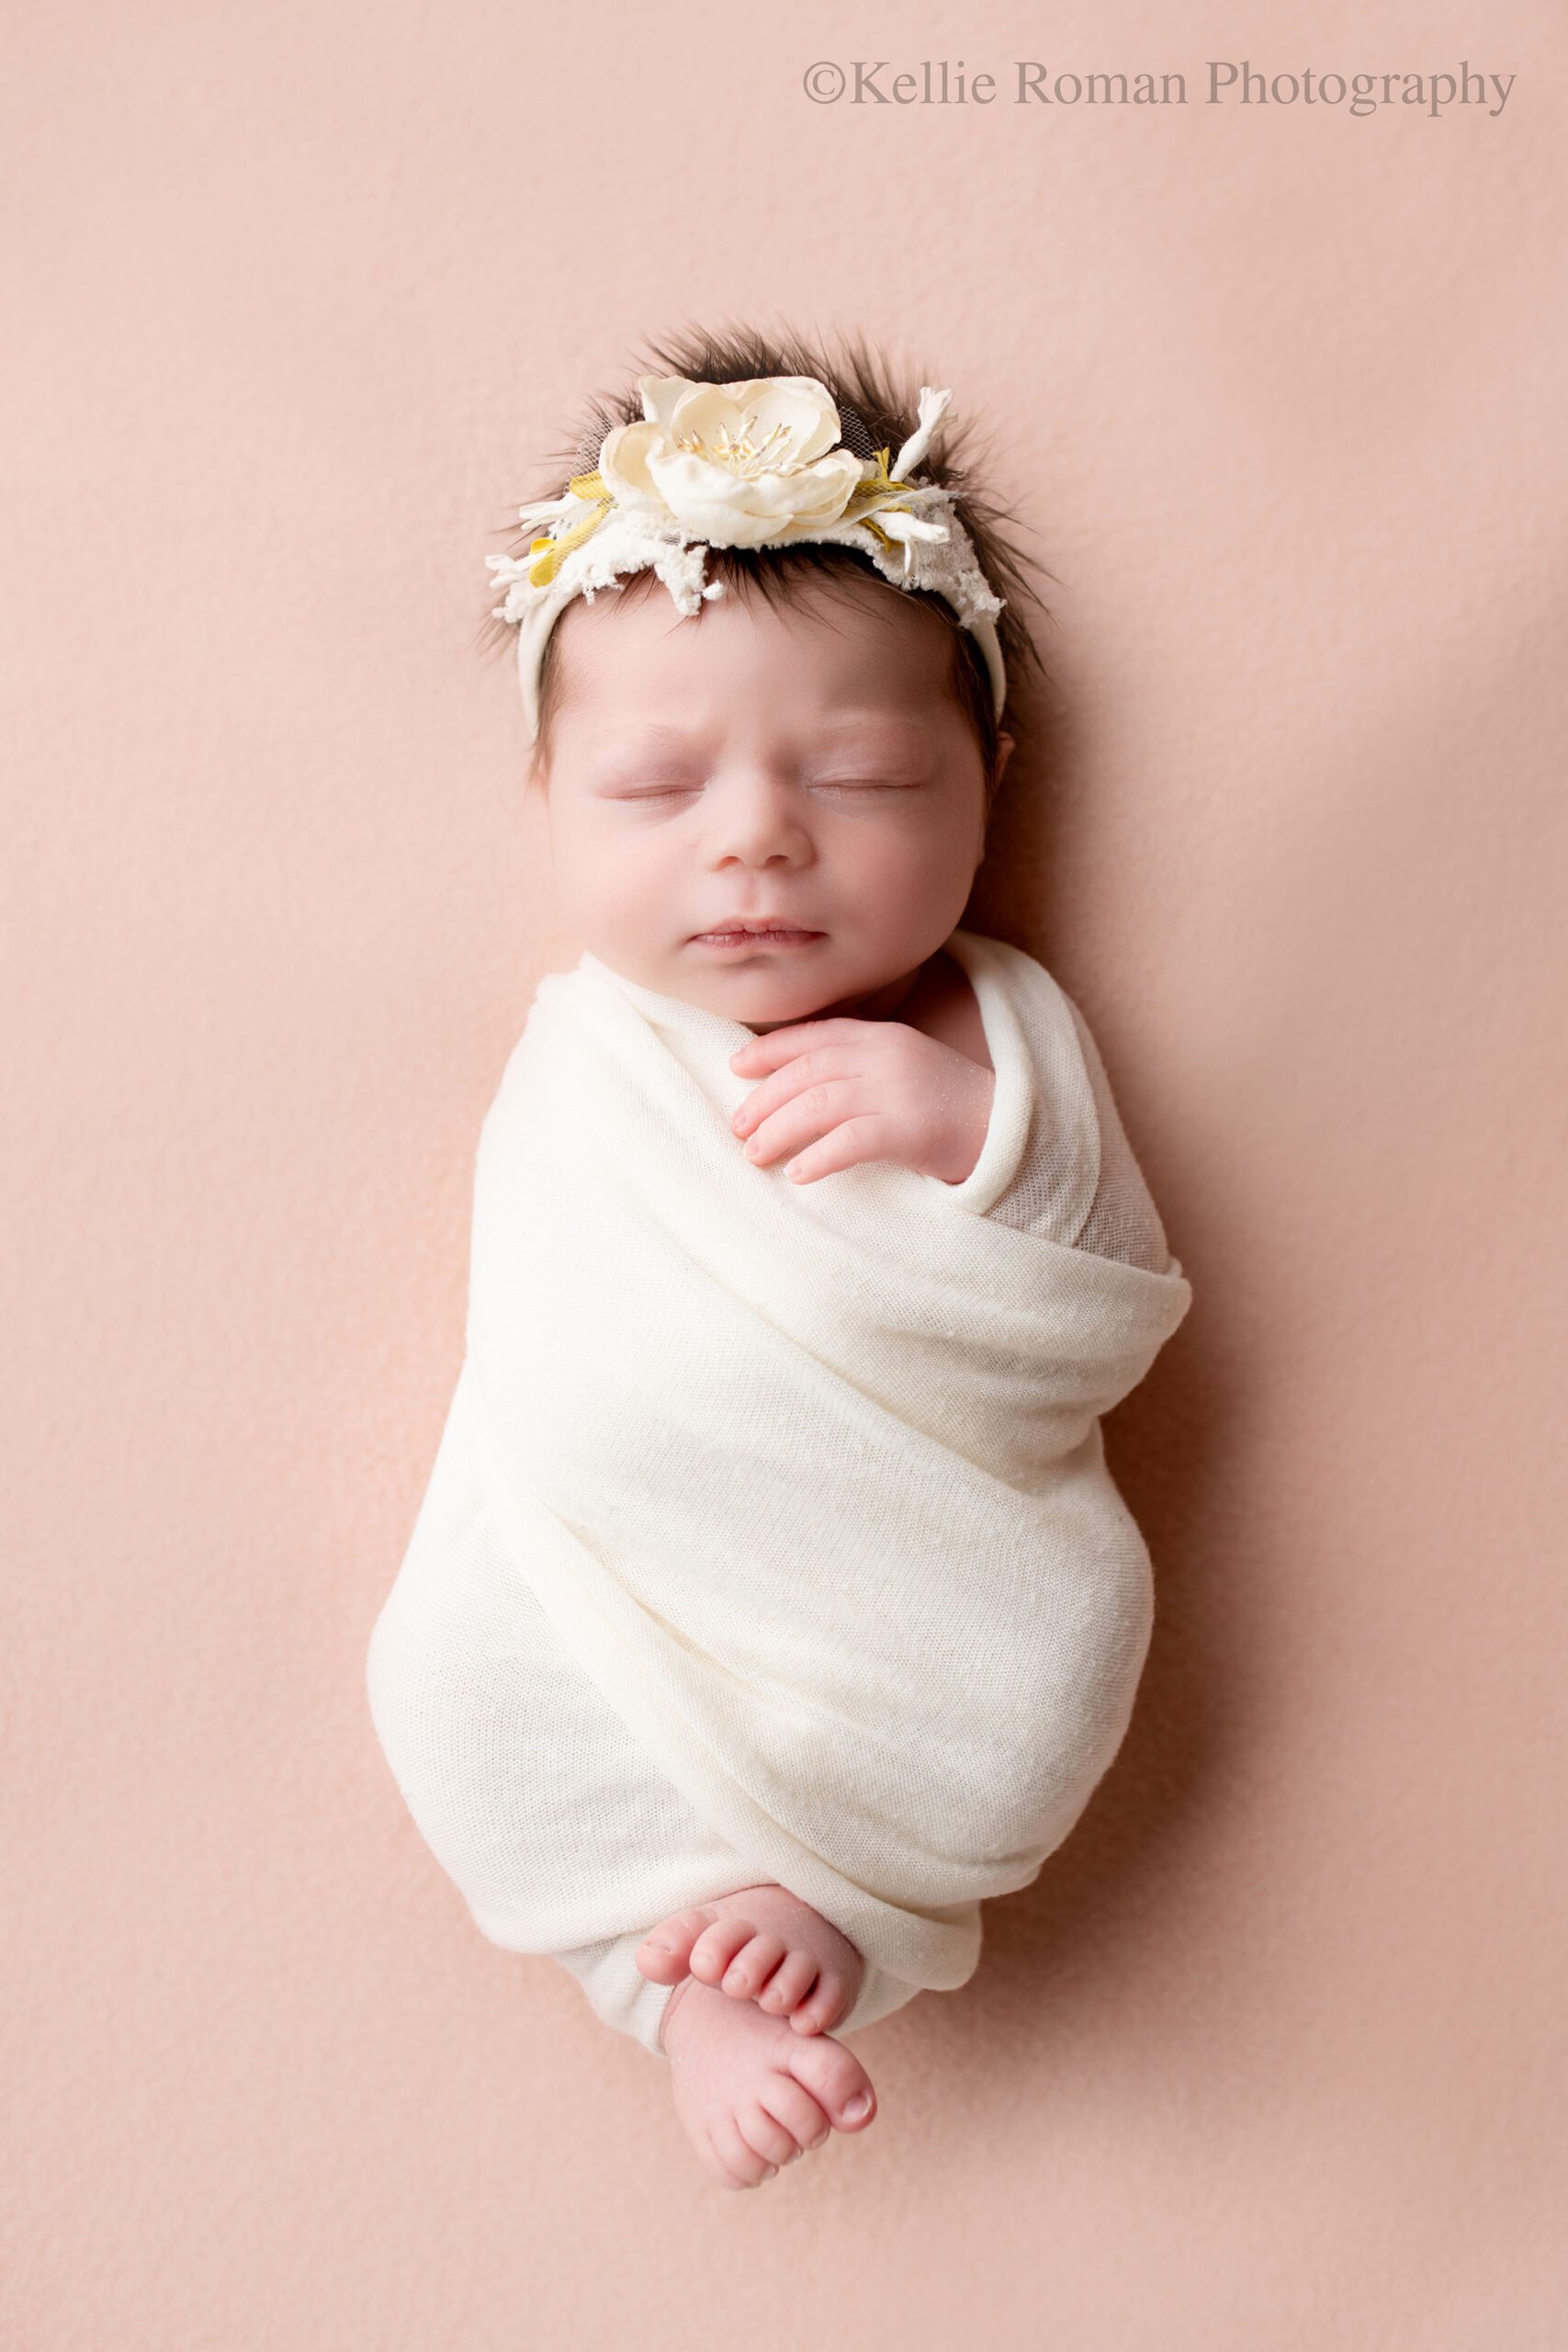 little newborn changes. newborn baby girl in a cream swaddle wrap with her toes and hand sticking out. the fabric she's laying on is pink, and the newborn is asleep. the headband she's wearing is cream floral. newborn has lots of dark brown hair. 
